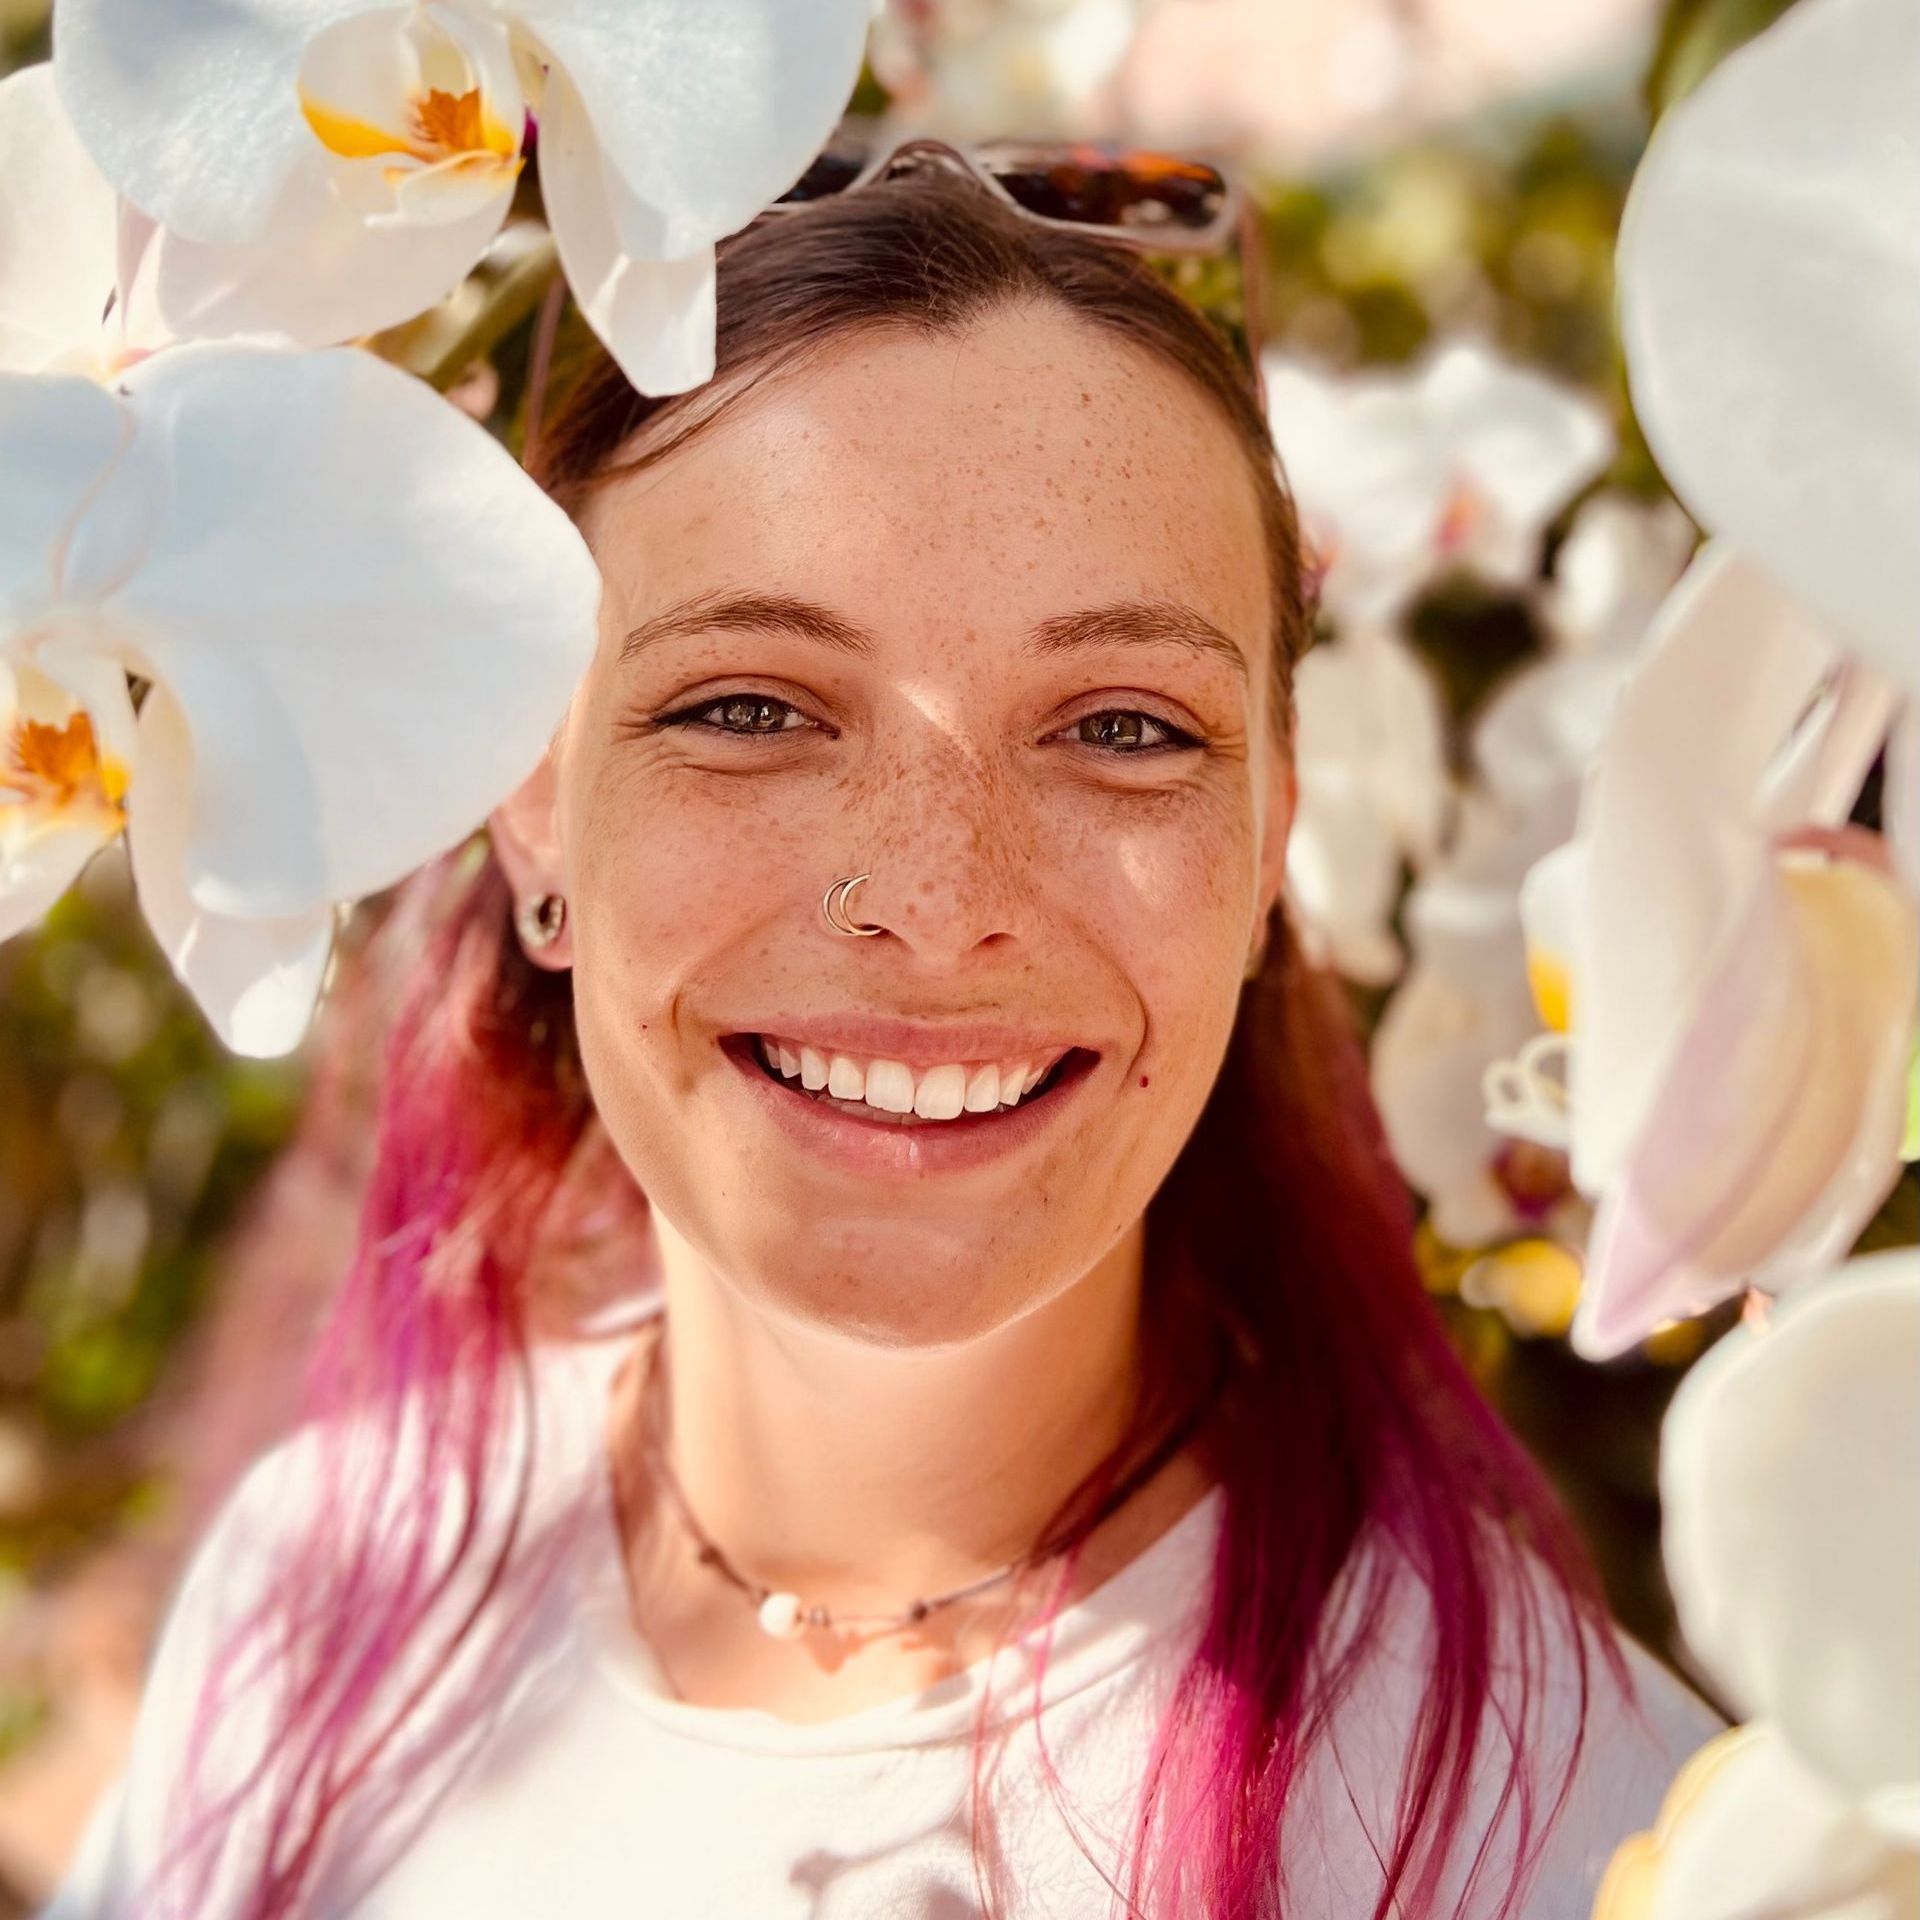 A woman with pink hair is smiling in front of flowers.